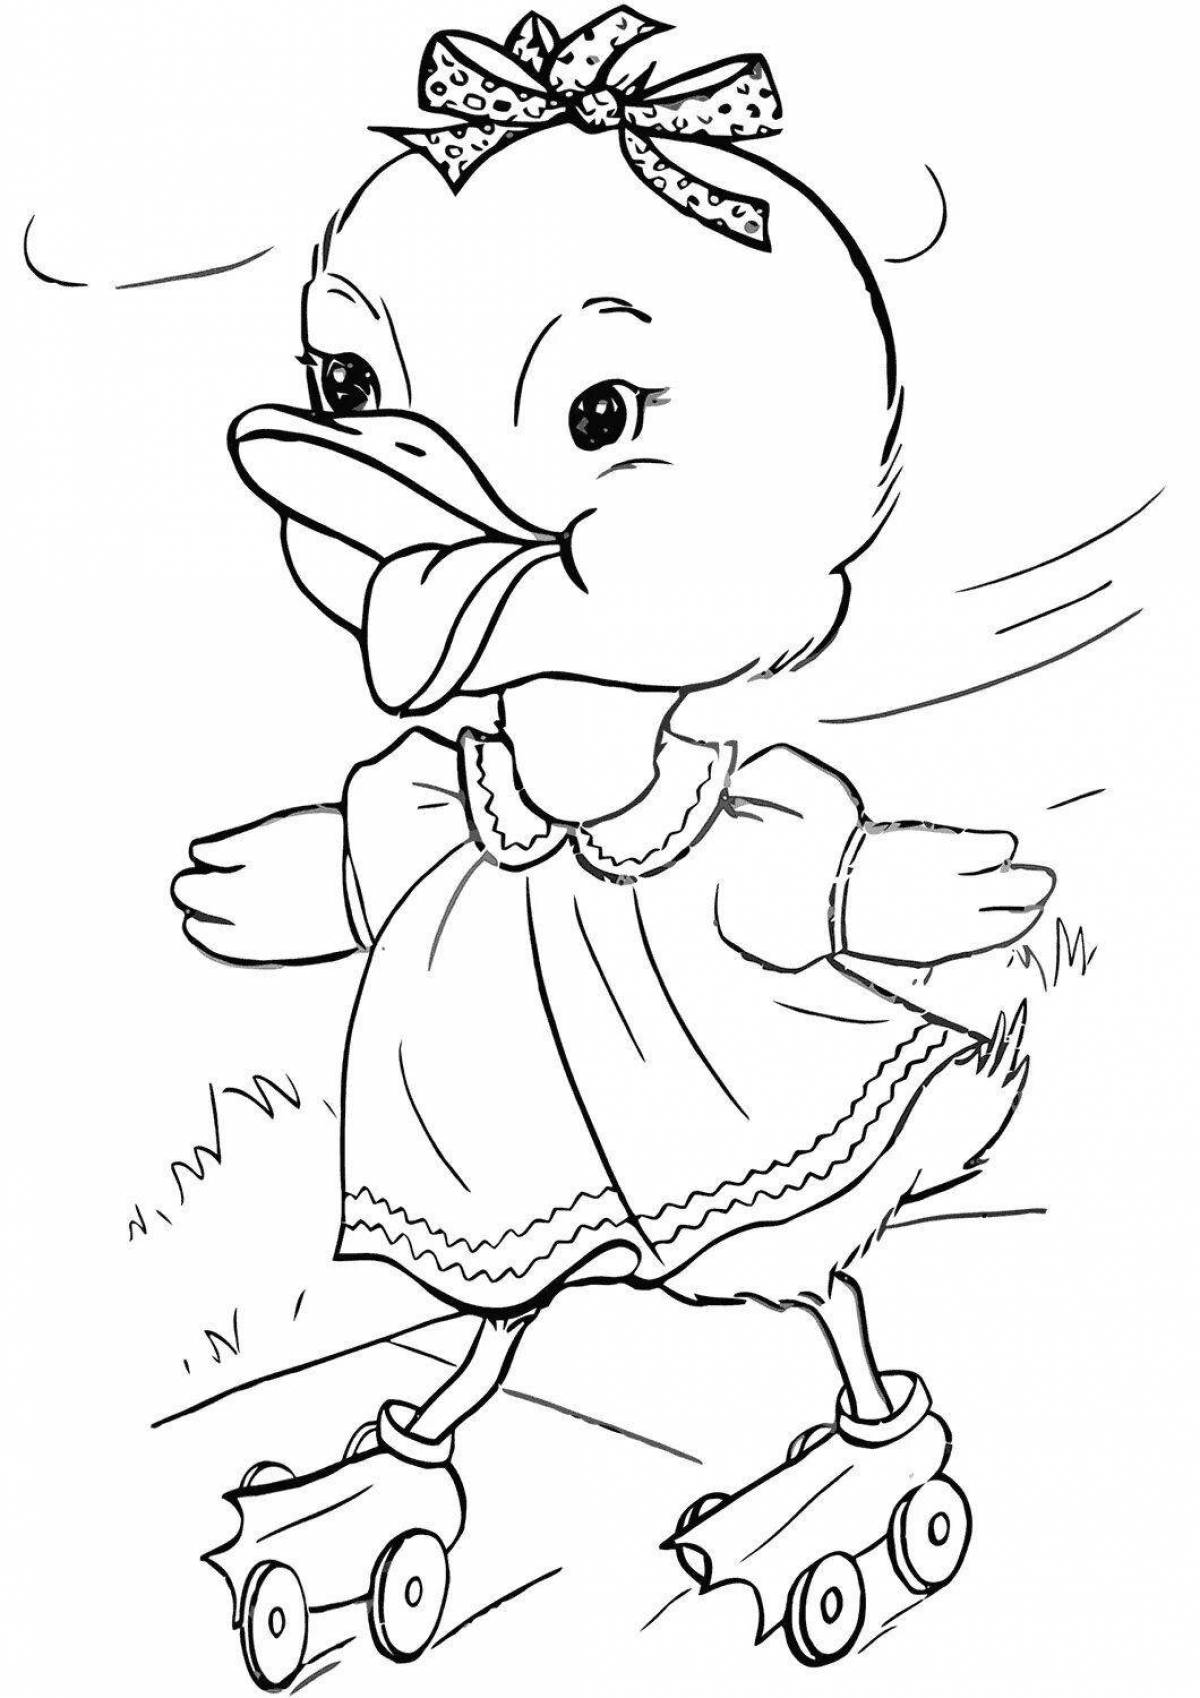 Lalafanfan sparkling duck coloring page